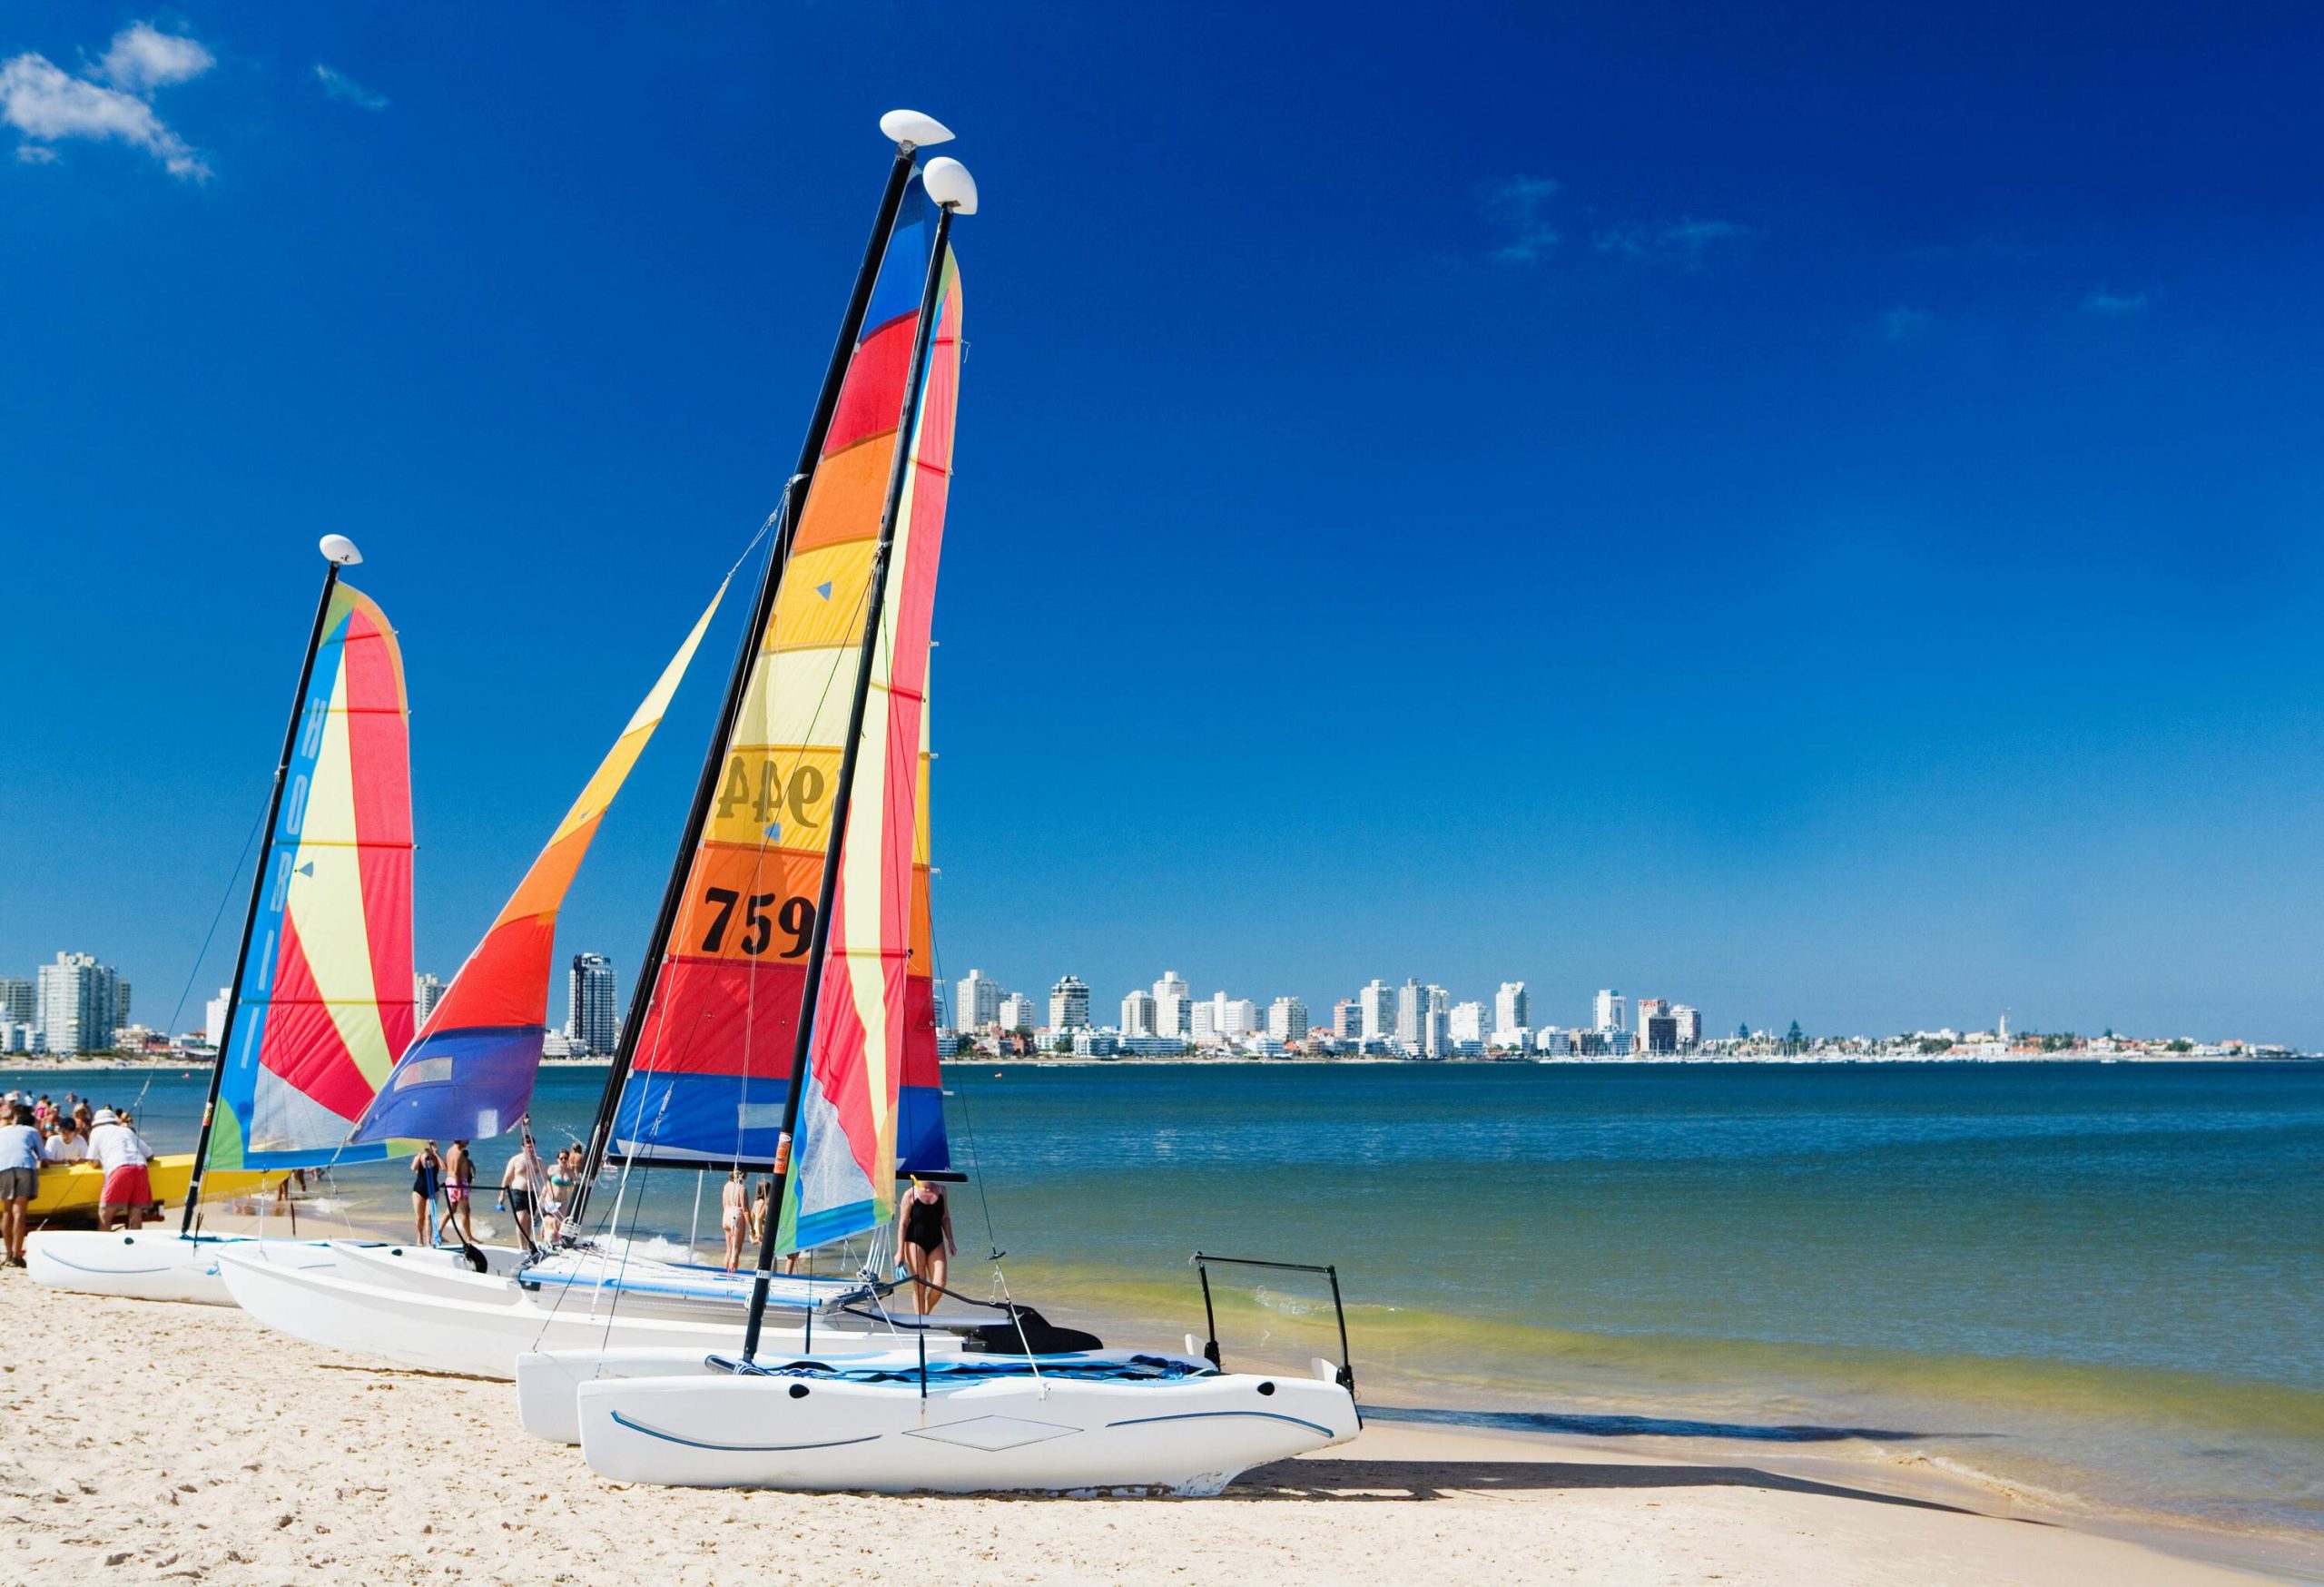 Colourful sailboats docked on the fine white sands, with some tourist passing by and a view of a cityscape in the distance.